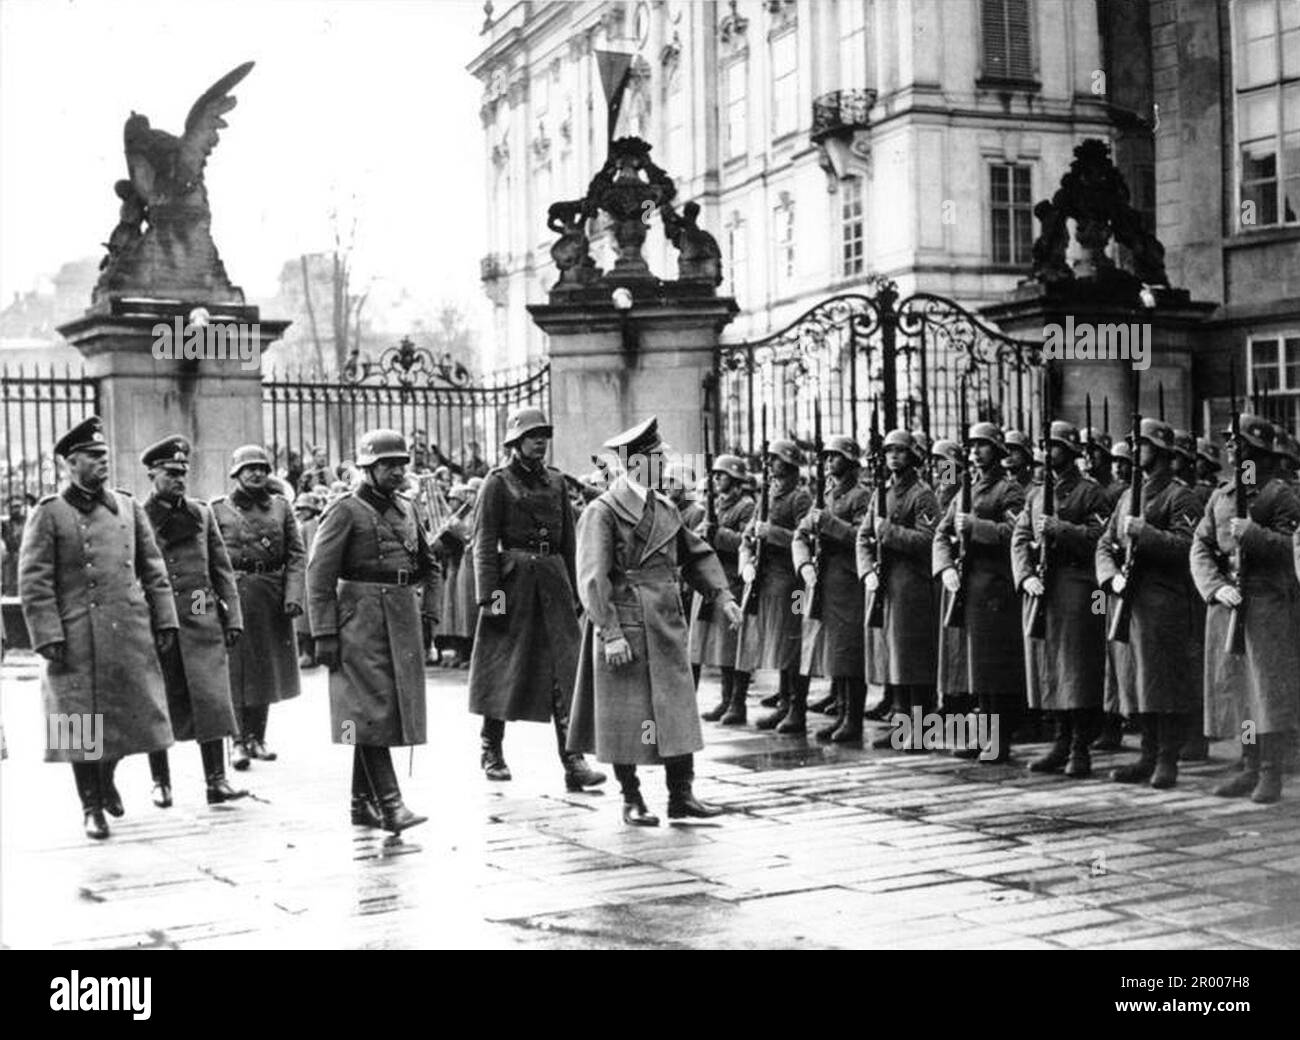 Adolf Hitler at Prague Castle after his invasion of Czechoslovakia.  After the annexation of Austria, Hitler demanded that he be given the Sudeten region of Czechoslovakia. At the Munich conference in September 1938 the Western powers agreed to this and the nazis occupied the area. Not long after Hitler broke his promise and invaded the rest of Czechoslovakia before turning his attention to Poland. Bundesarchiv, Bild 183-2004-1202-505 / CC-BY-SA 3.0 Stock Photo